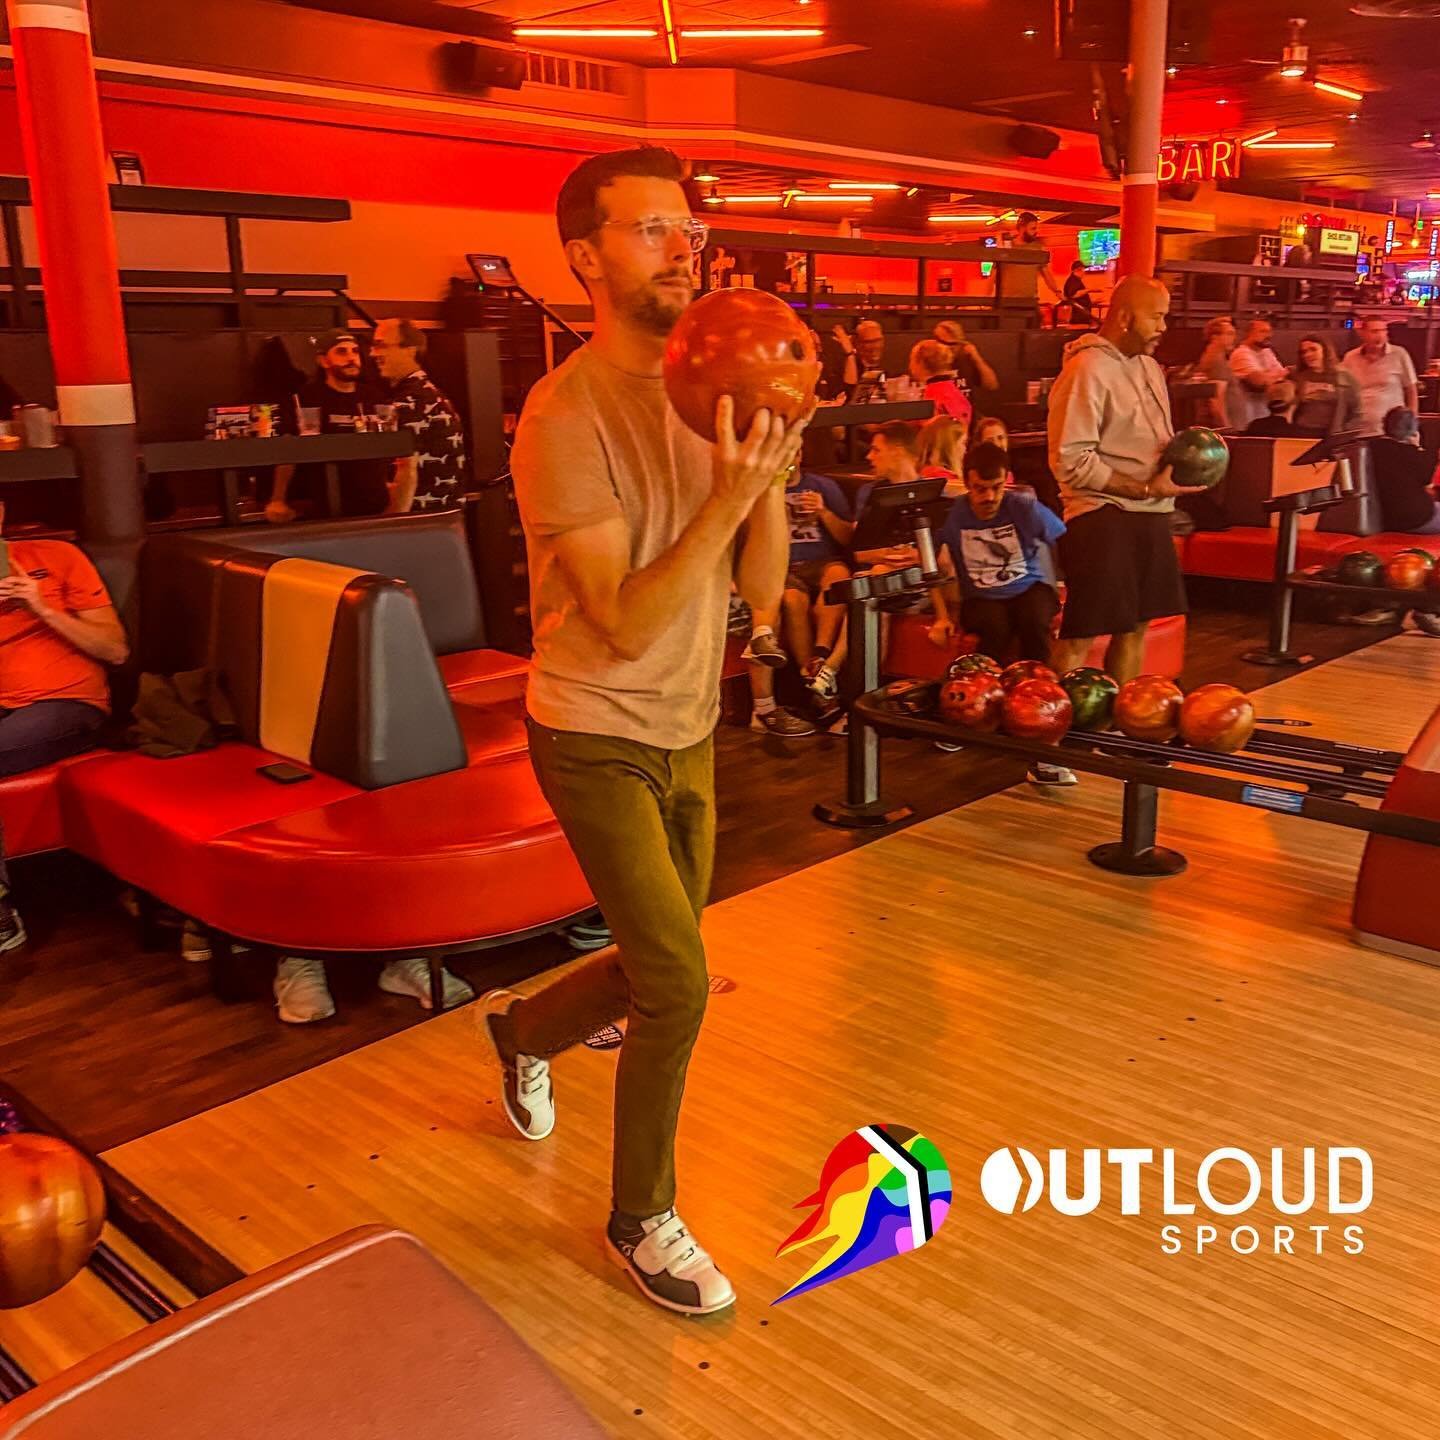 Did you know that OutLoud Sports Denver has 🎳 leagues?!? Keep an eye out for our next season. Strikes, spares and sashaying! Do you need more? ⚫️ 🏳️&zwj;🌈 #bowlingindenver #queersbowling #getoutofthegutter #outloudsports